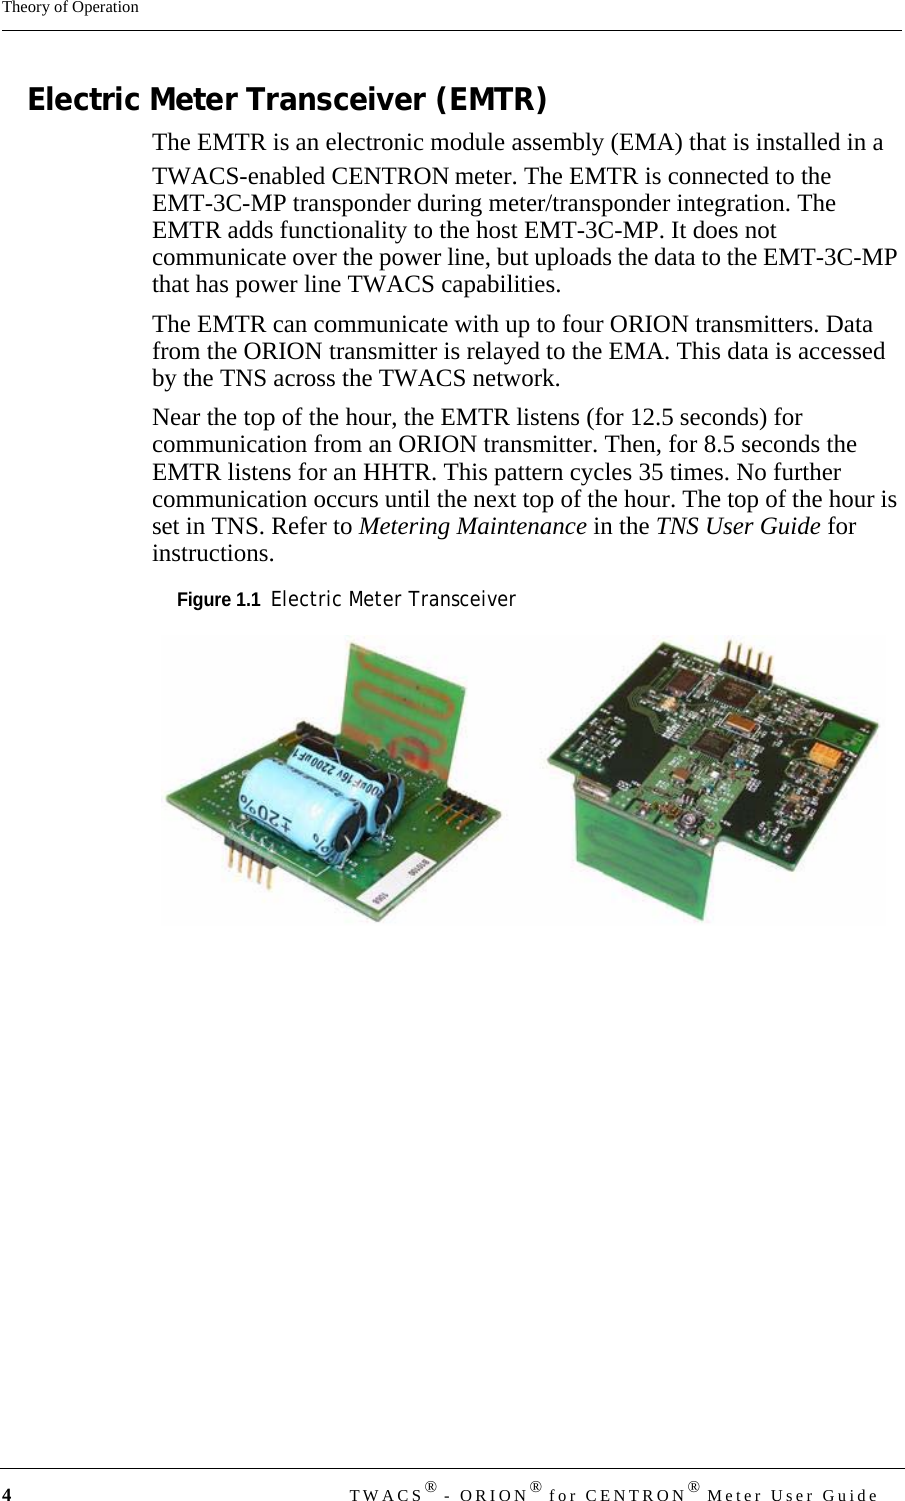 4TWACS® - ORION® for CENTRON® Meter User GuideTheory of OperationElectric Meter Transceiver (EMTR)The EMTR is an electronic module assembly (EMA) that is installed in a TWACS-enabled CENTRON meter. The EMTR is connected to the EMT-3C-MP transponder during meter/transponder integration. The EMTR adds functionality to the host EMT-3C-MP. It does not communicate over the power line, but uploads the data to the EMT-3C-MP that has power line TWACS capabilities. The EMTR can communicate with up to four ORION transmitters. Data from the ORION transmitter is relayed to the EMA. This data is accessed by the TNS across the TWACS network.Near the top of the hour, the EMTR listens (for 12.5 seconds) for communication from an ORION transmitter. Then, for 8.5 seconds the EMTR listens for an HHTR. This pattern cycles 35 times. No further communication occurs until the next top of the hour. The top of the hour is set in TNS. Refer to Metering Maintenance in the TNS User Guide for instructions.Figure 1.1  Electric Meter Transceiver  